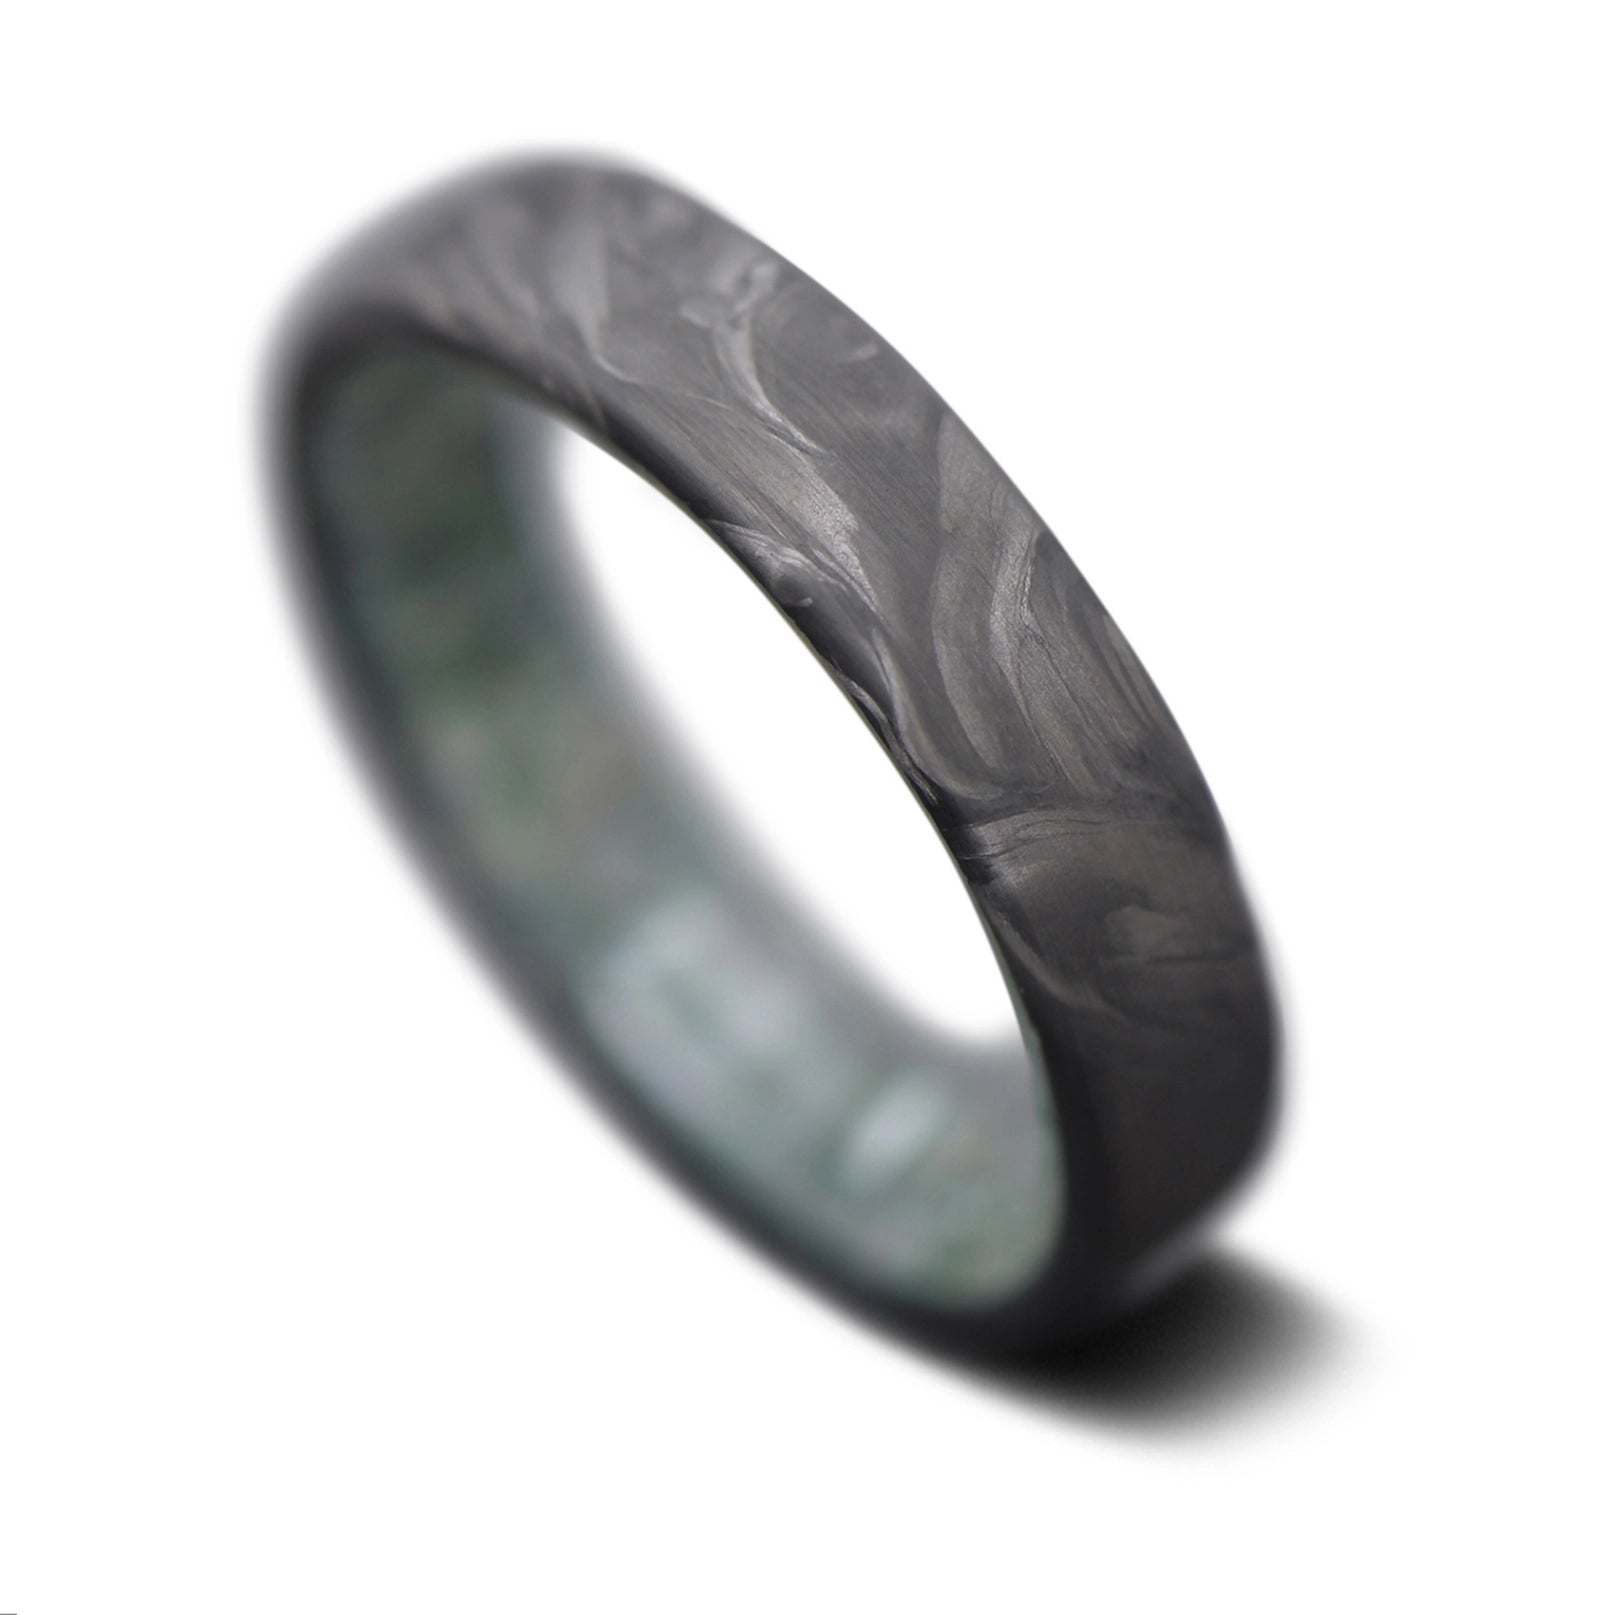 CarbonForged Core Ring with  Moss Agate inner sleeve, 5mm -THE QUEST